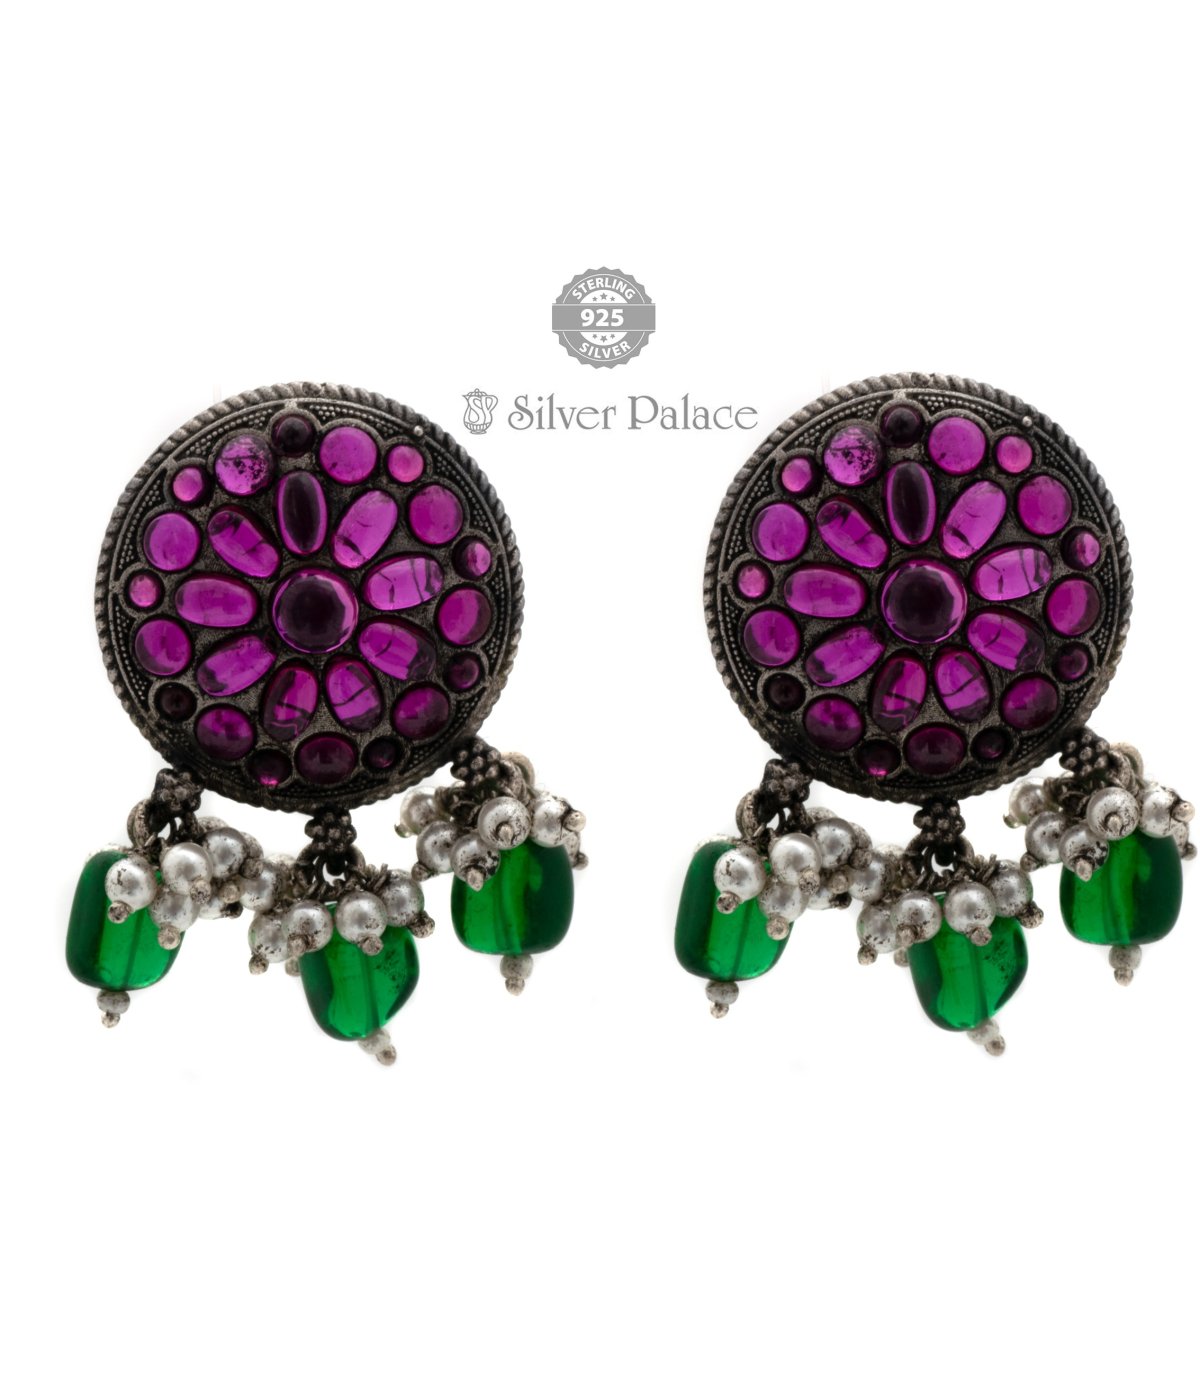 92.5 Pure silver RUBY EMBELLISHED   earrings with aventurine pumpkin drops